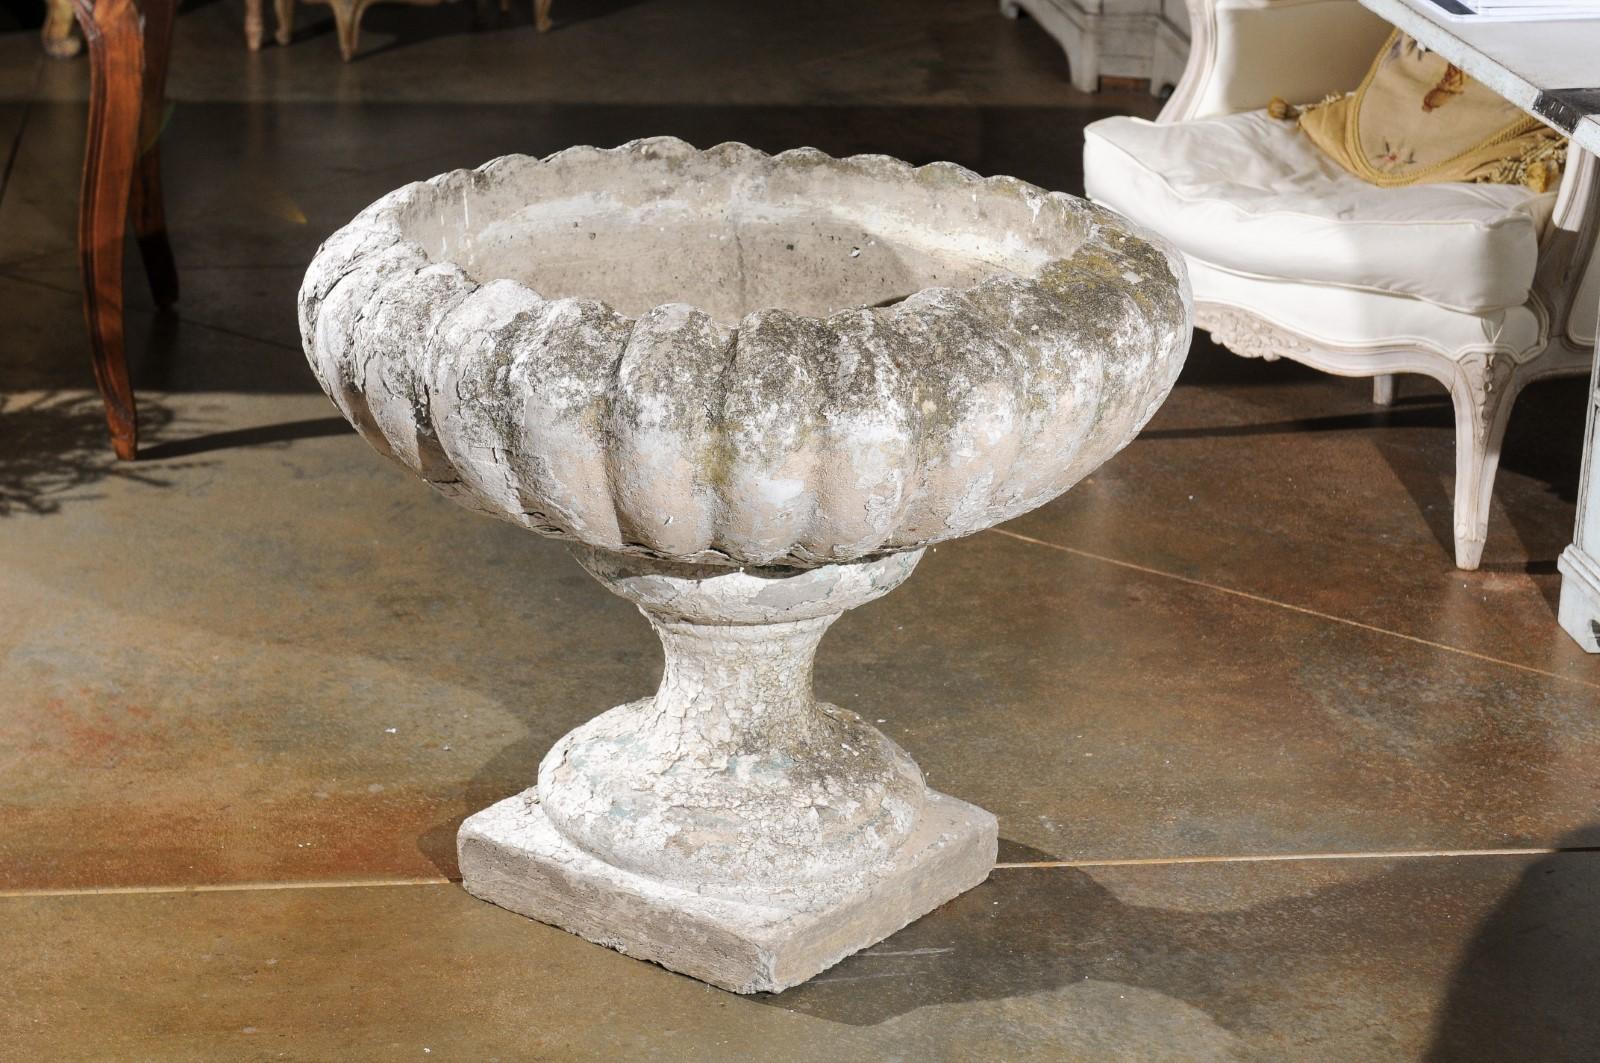 A French large carved stone garden urn from the 19th century, with nicely weathered appearance and gadroon motifs. Born in France during the 19th century, this exquisite garden urn features a circular body adorned with gadroon motifs, presenting a